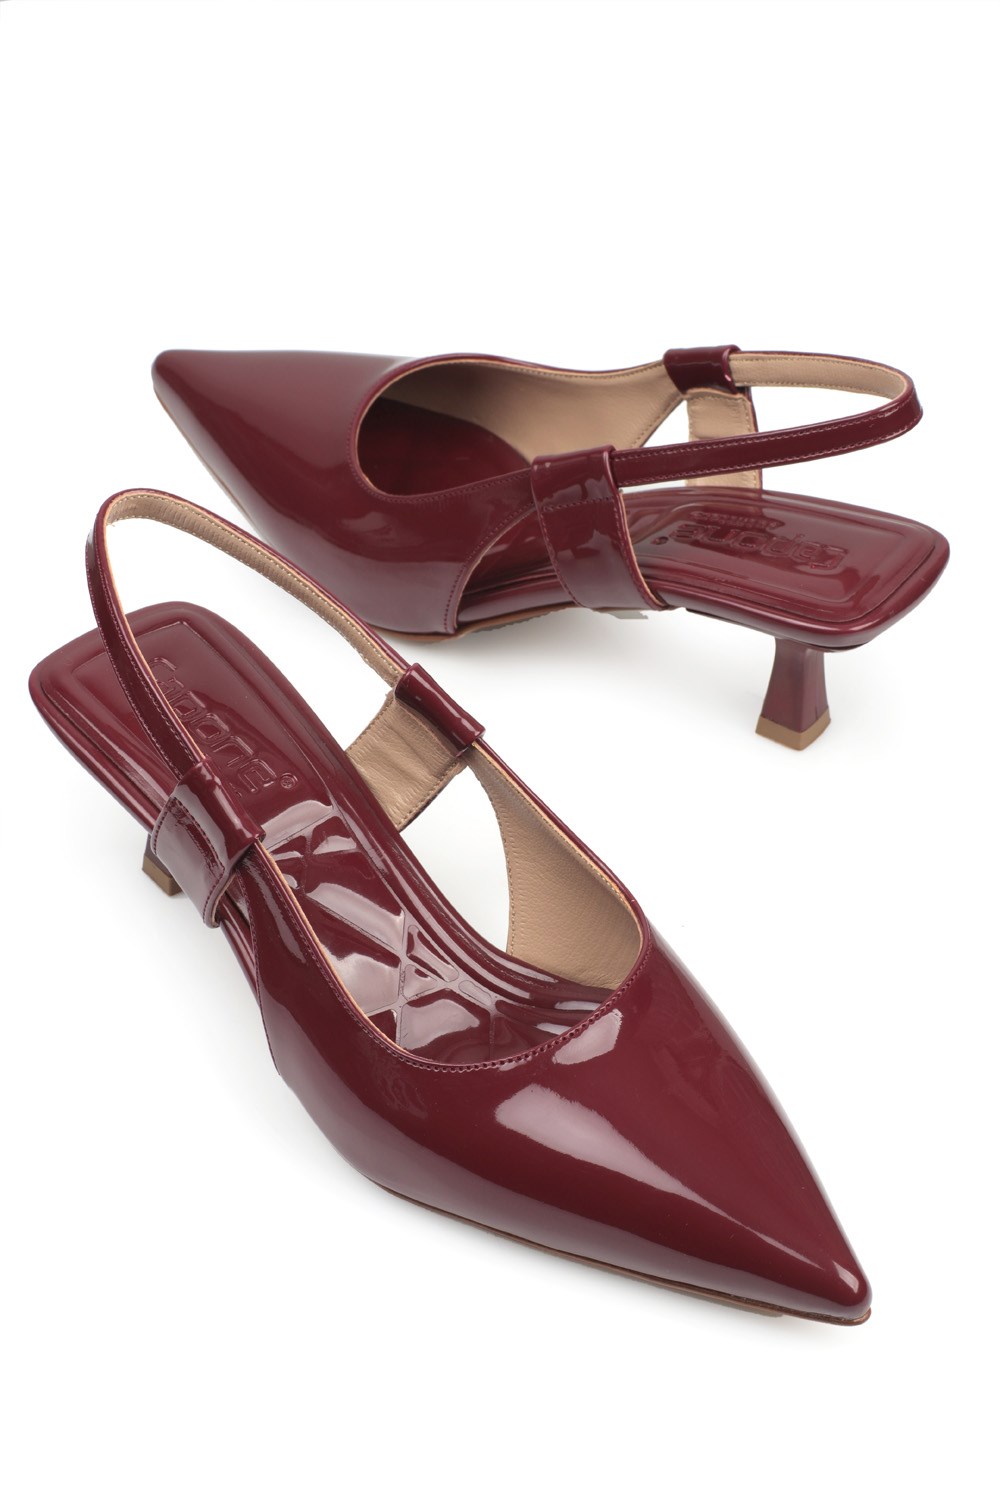 Capone Mid Heel Pointed Toe Slingback Patent Leather Mid Heel Women  Burgundy Shoes